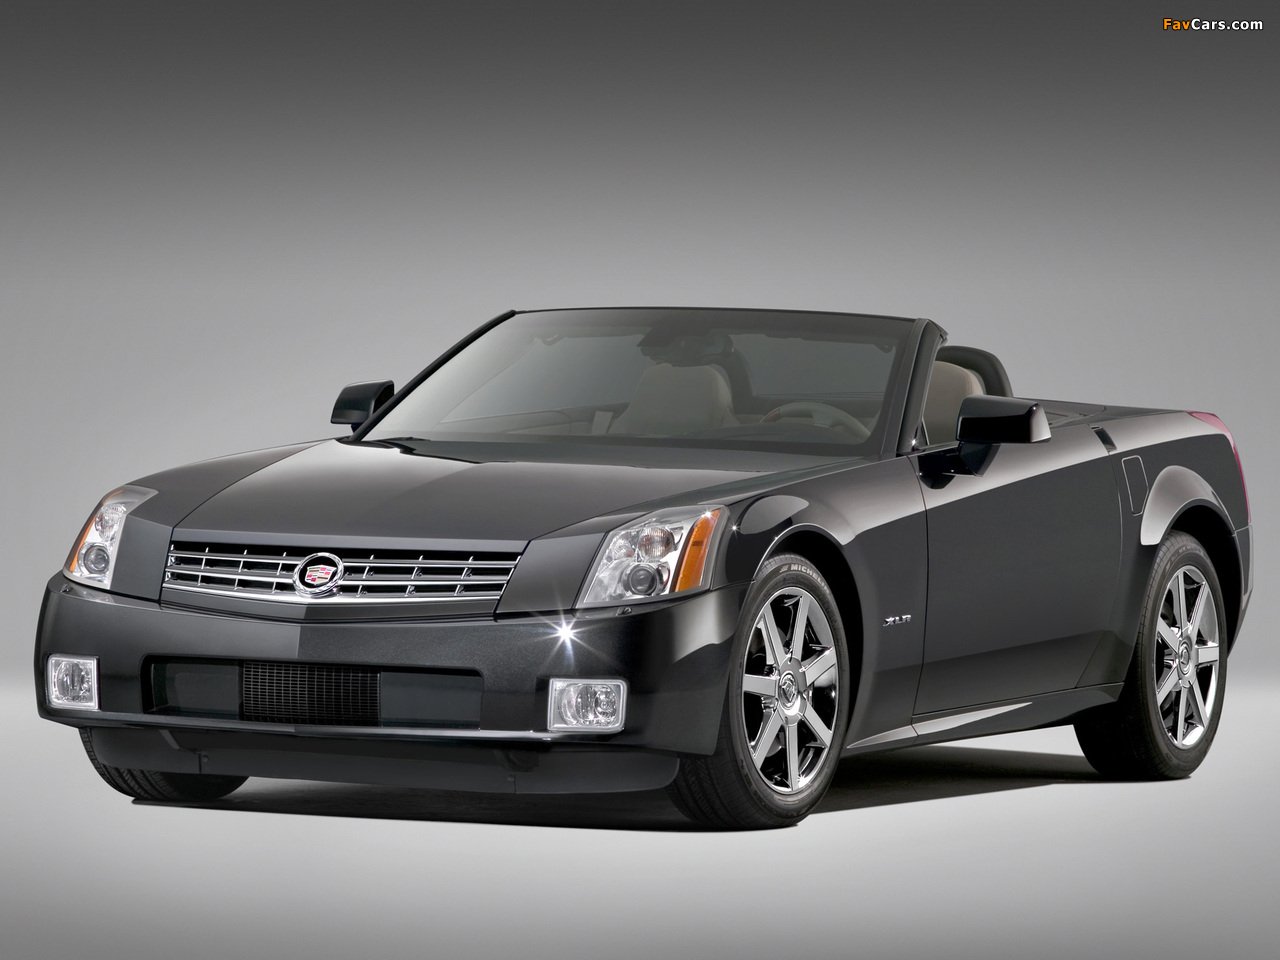 Cadillac XLR Star Black Limited Edition 2006 pictures (1280 x 960)